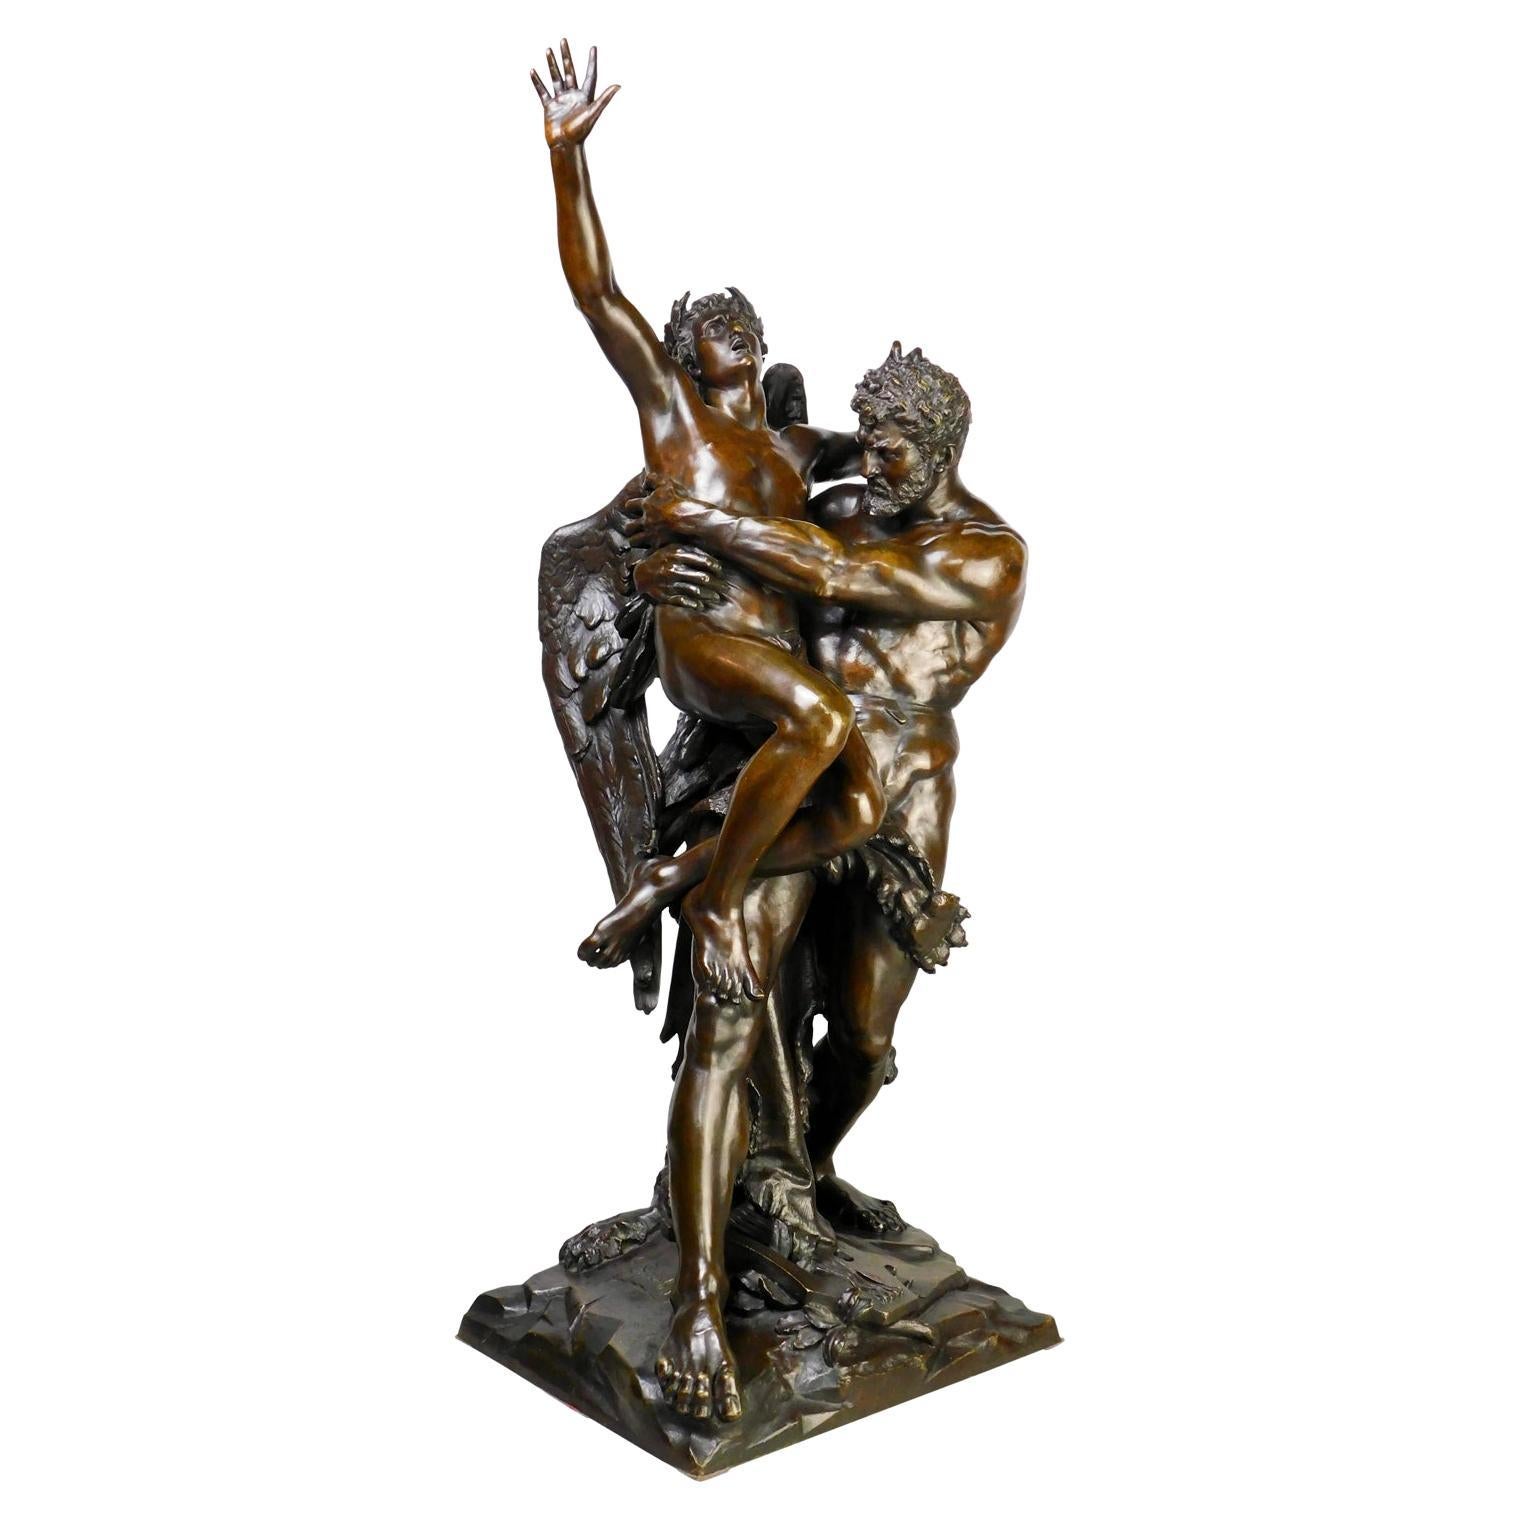 Antique Bronze Sculpture Genius and Brute Force by Cyprien Godebski